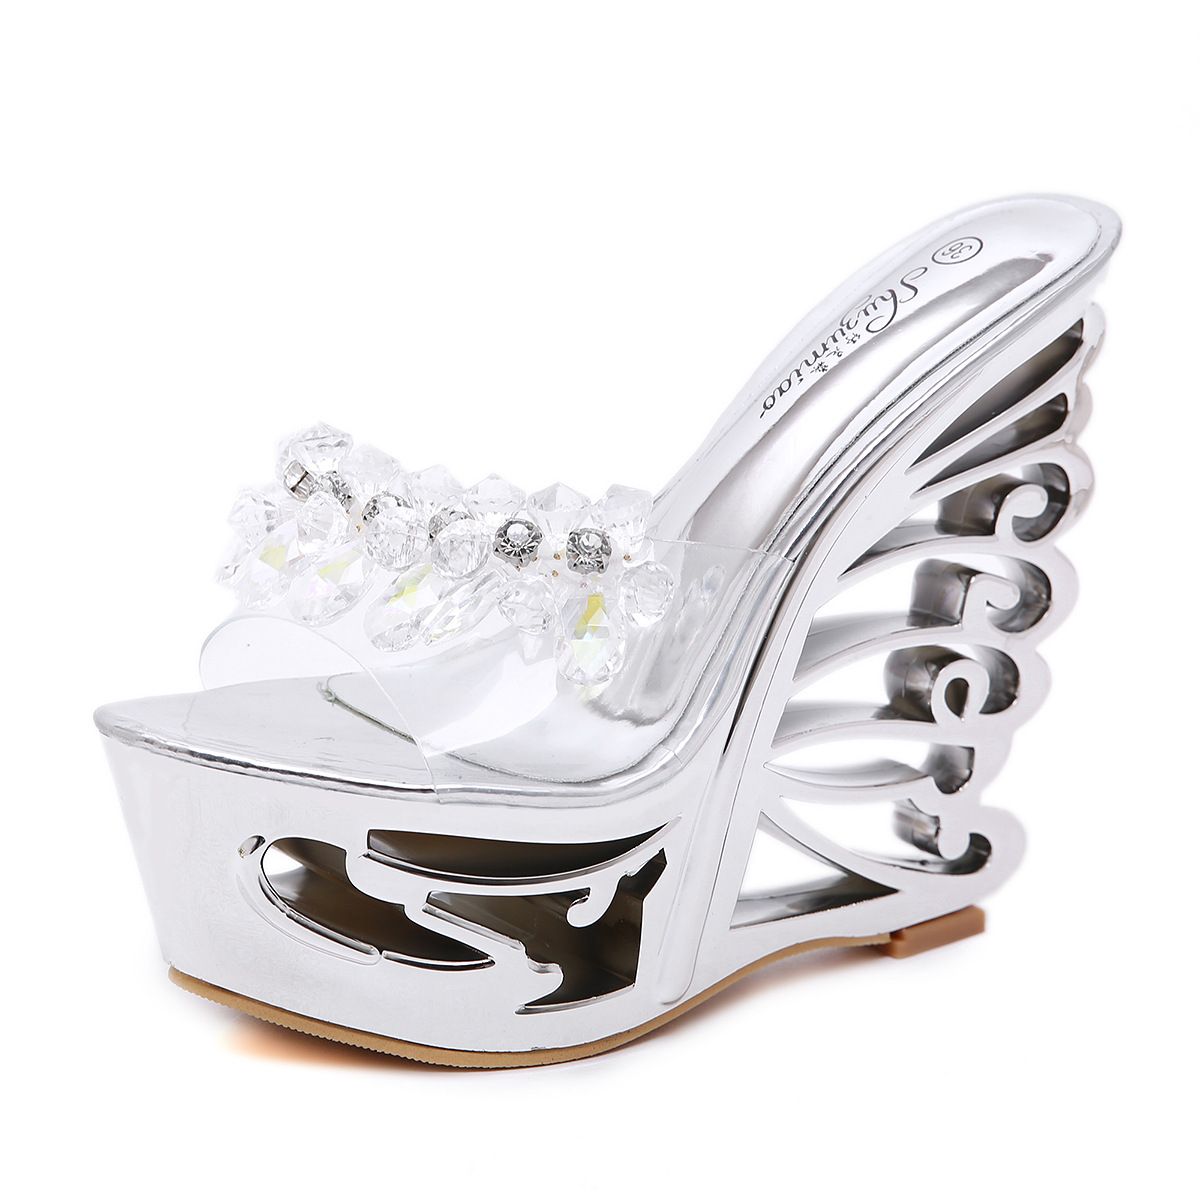 silver closed toe sandals